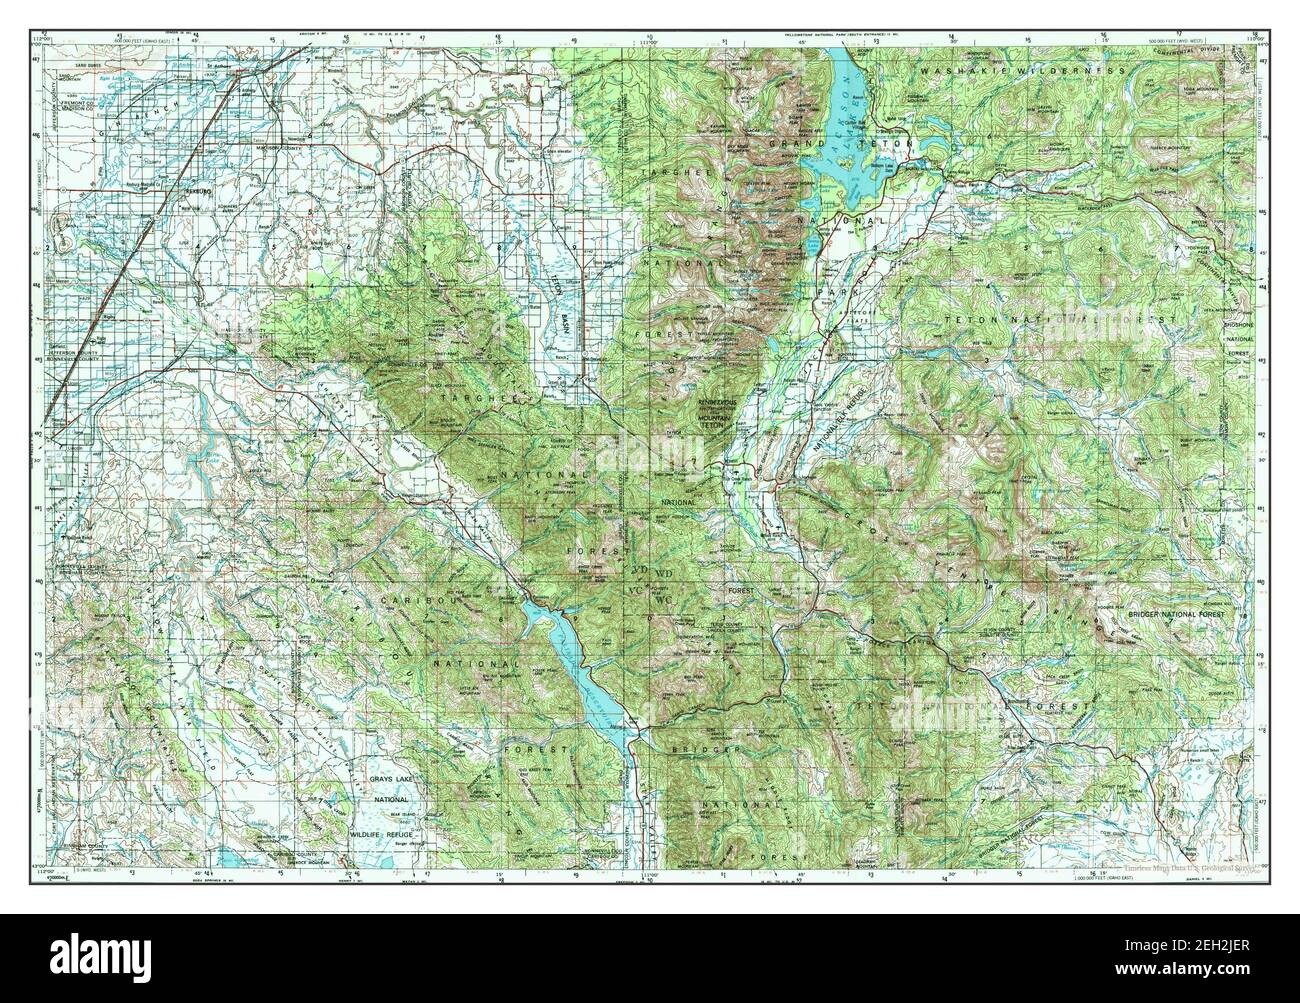 Driggs, Idaho, map 1955, 1:250000, United States of America by Timeless Maps, data U.S. Geological Survey Stock Photo